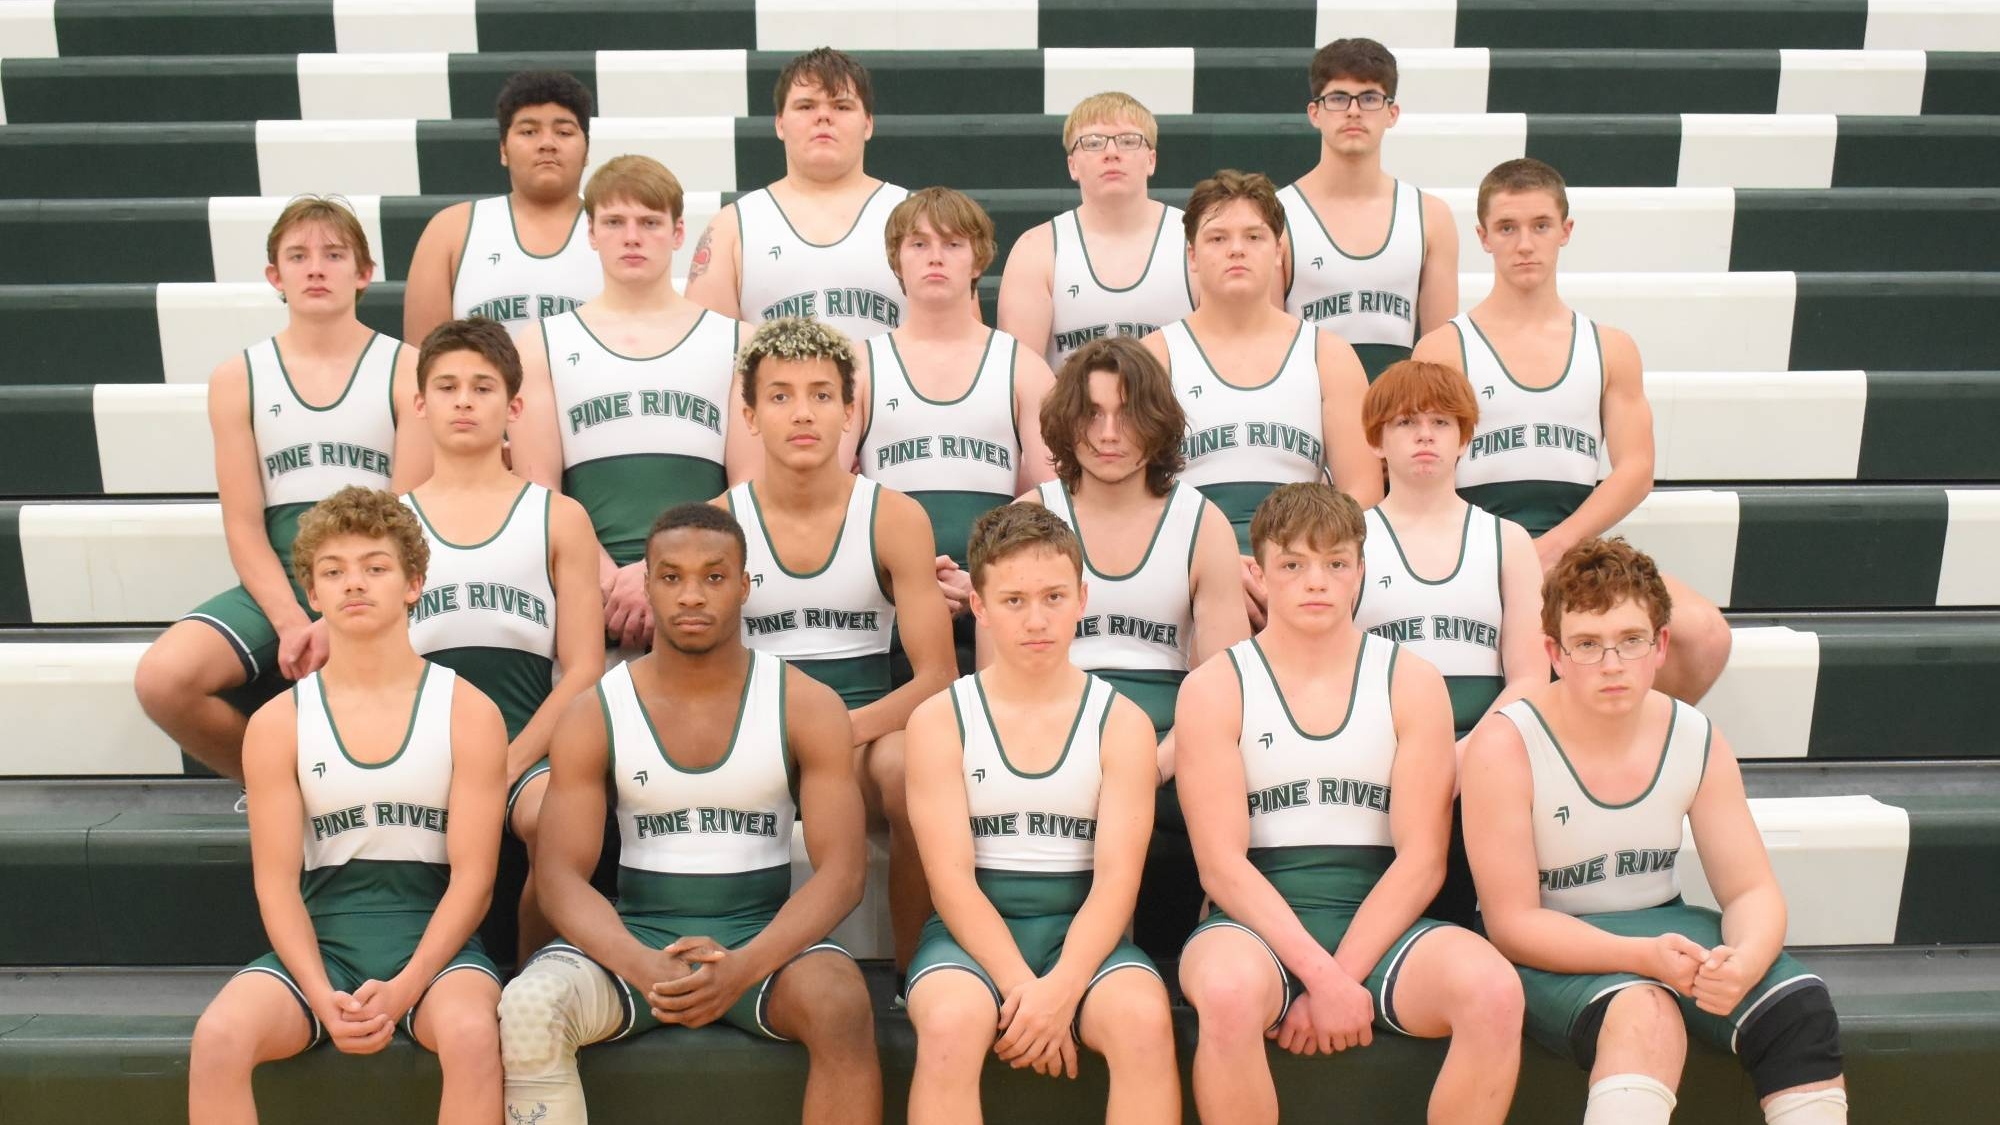 Boys Wrestling - Content Image for pineriverhighschool_bigteams_17835